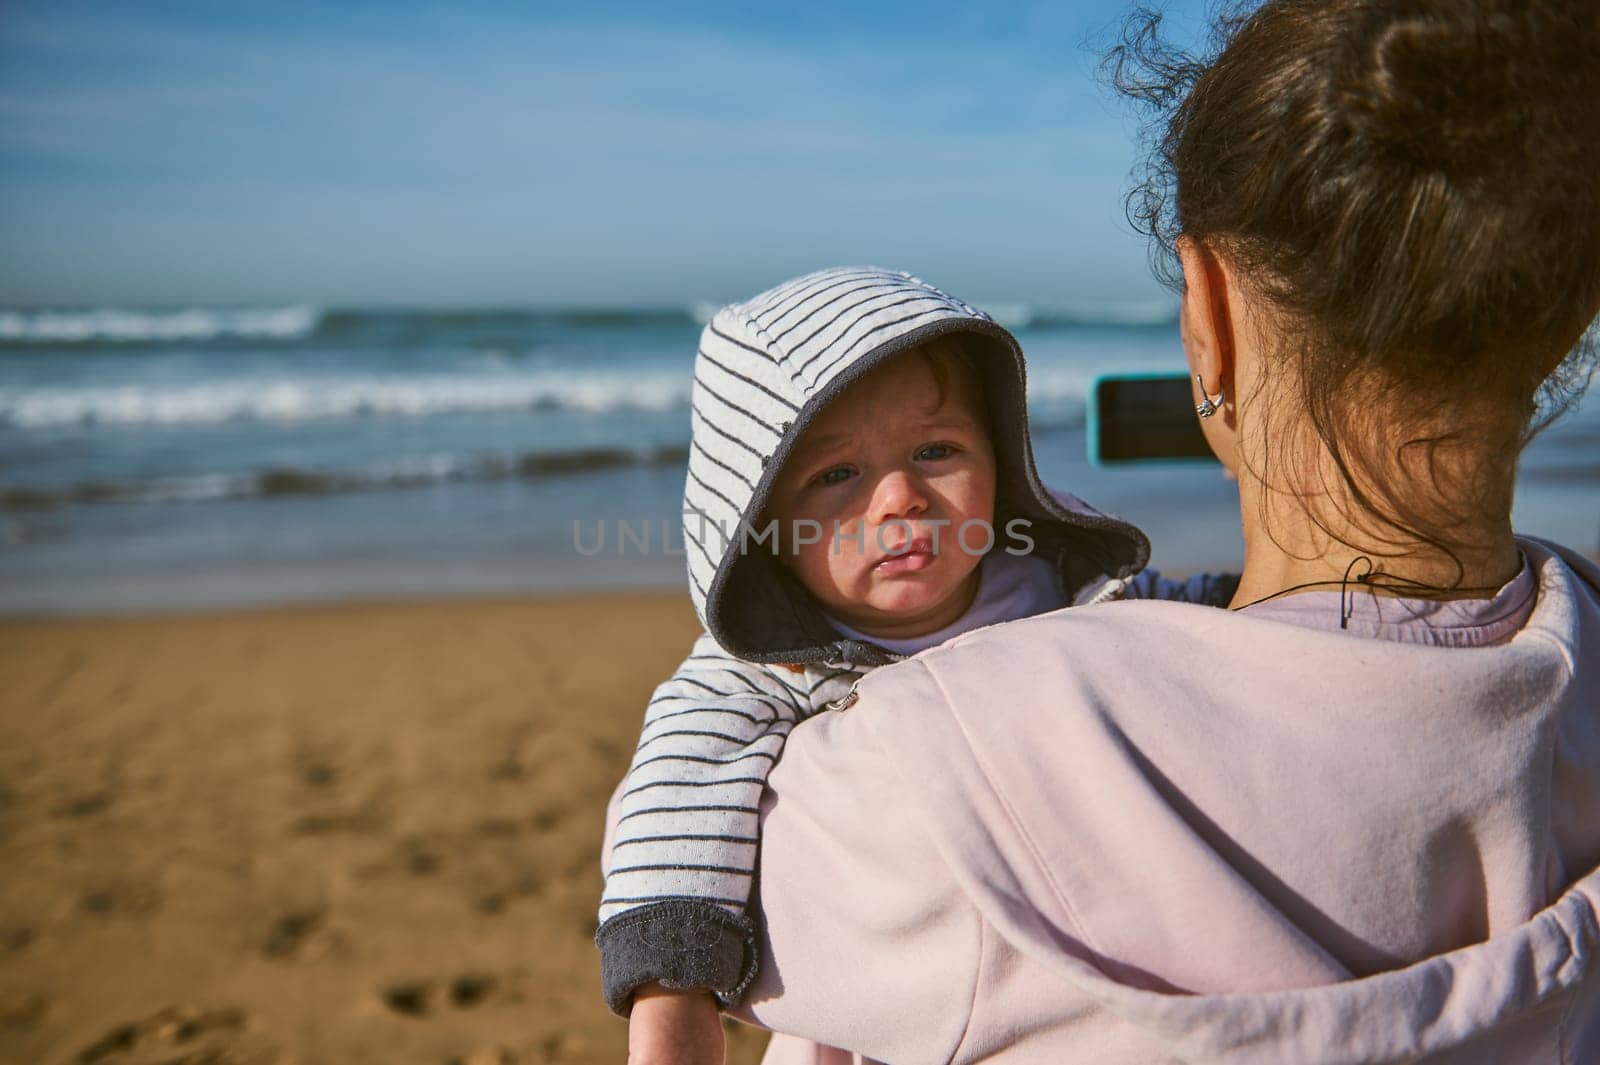 Adorable baby boy in arms of his mother taking photo of sea on smartphone, standing on sandy beach back to camera and photographing beautiful waves splashing on the Atlantic ocean. People and nature